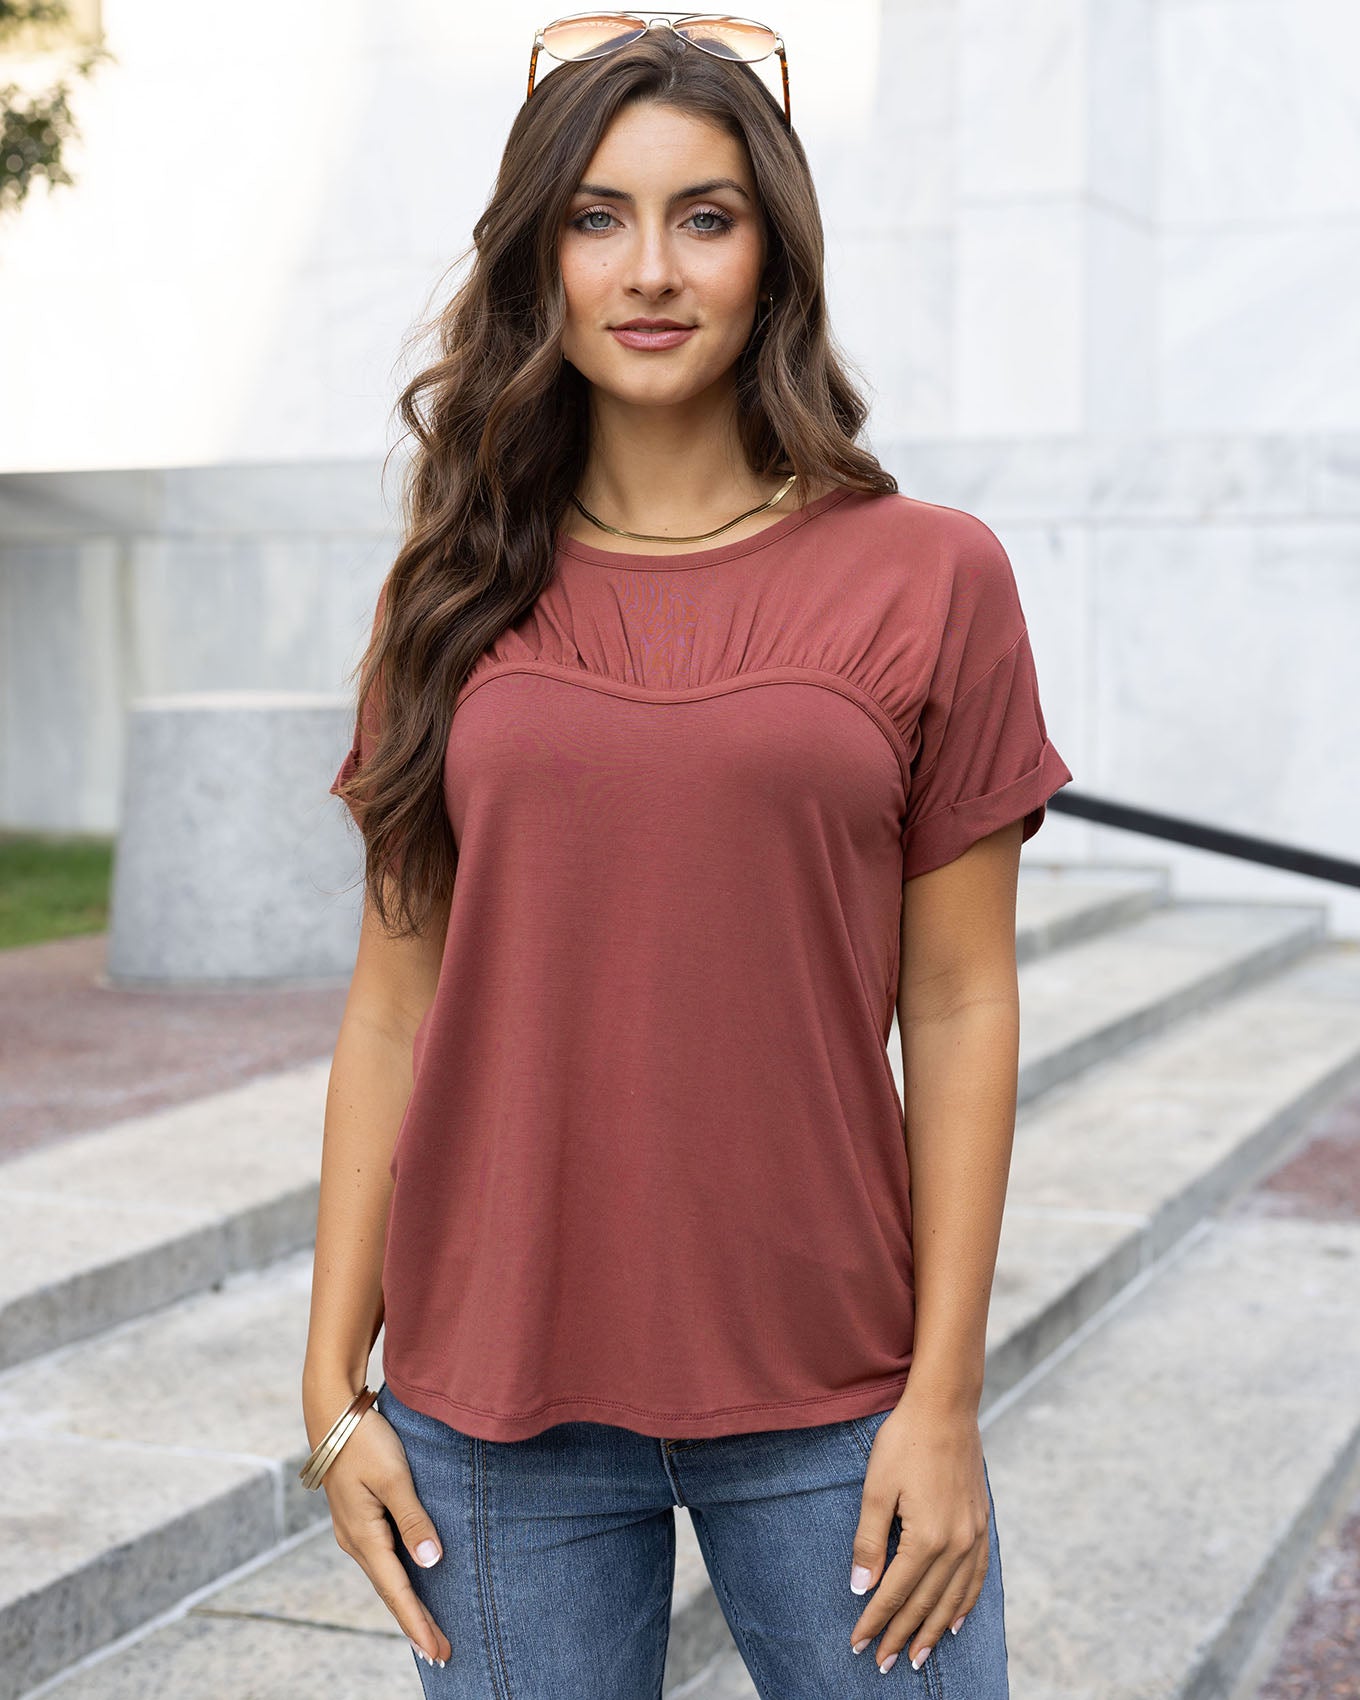 Sweetheart Tee in Adobe Red - Grace and Lace